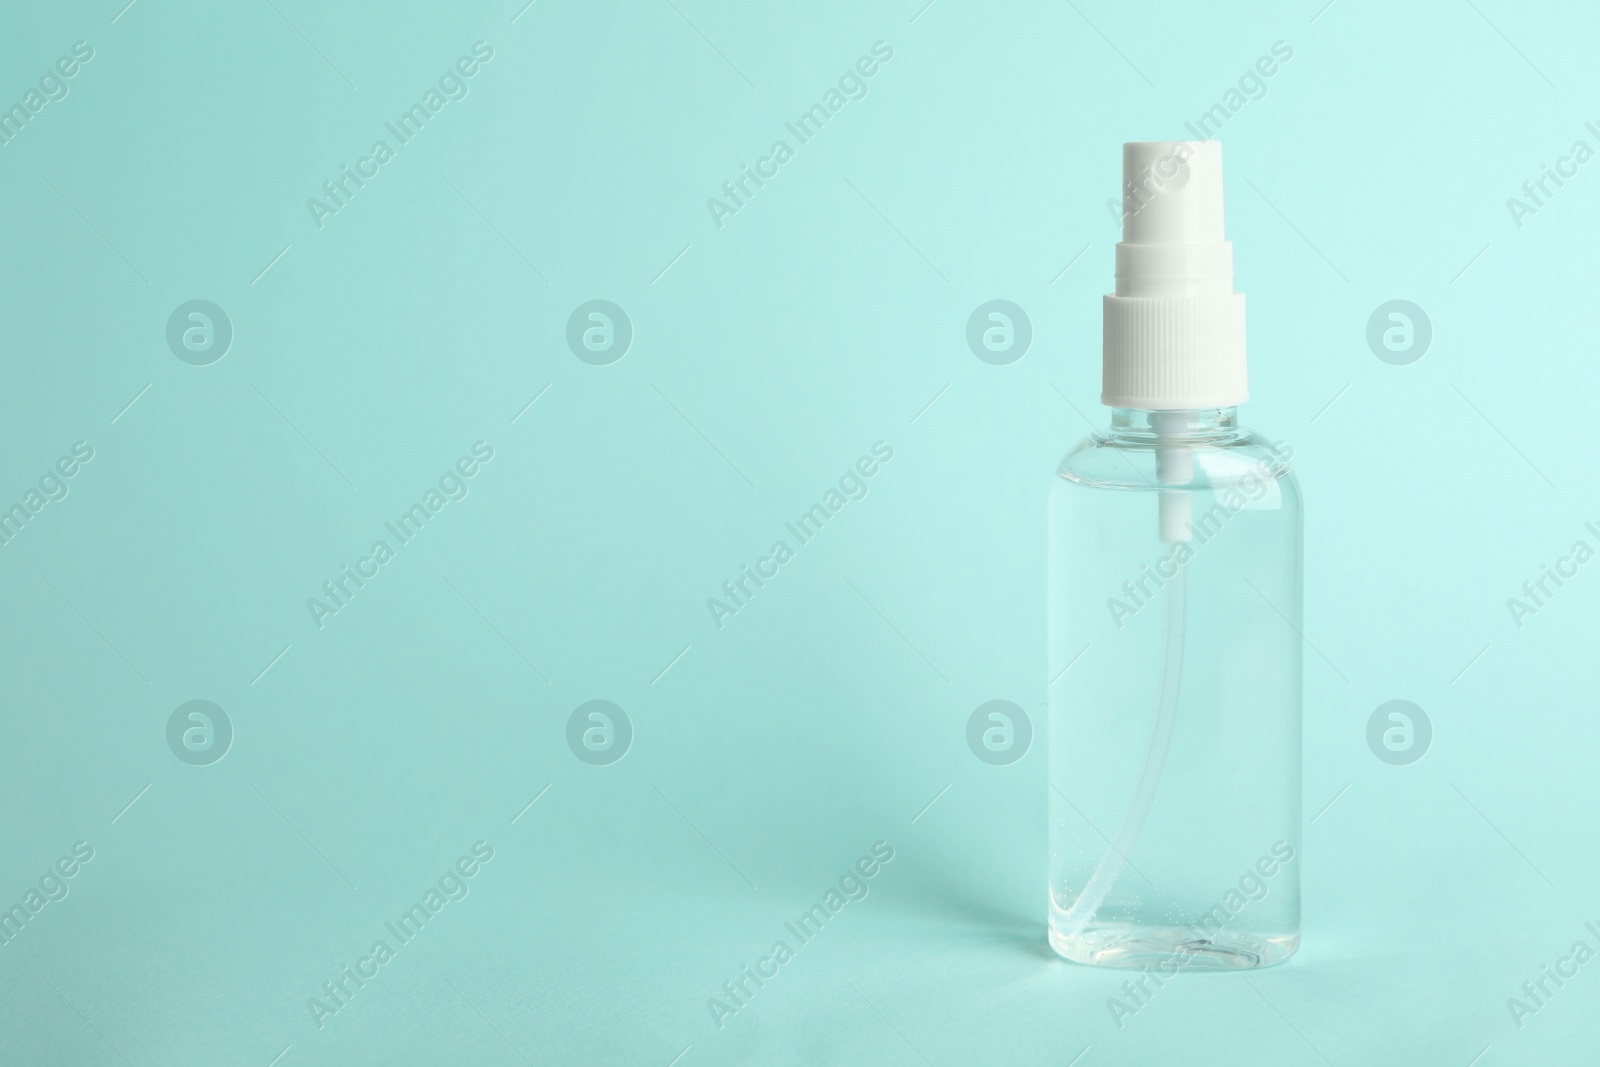 Photo of Antiseptic spray on light blue background. Space for text